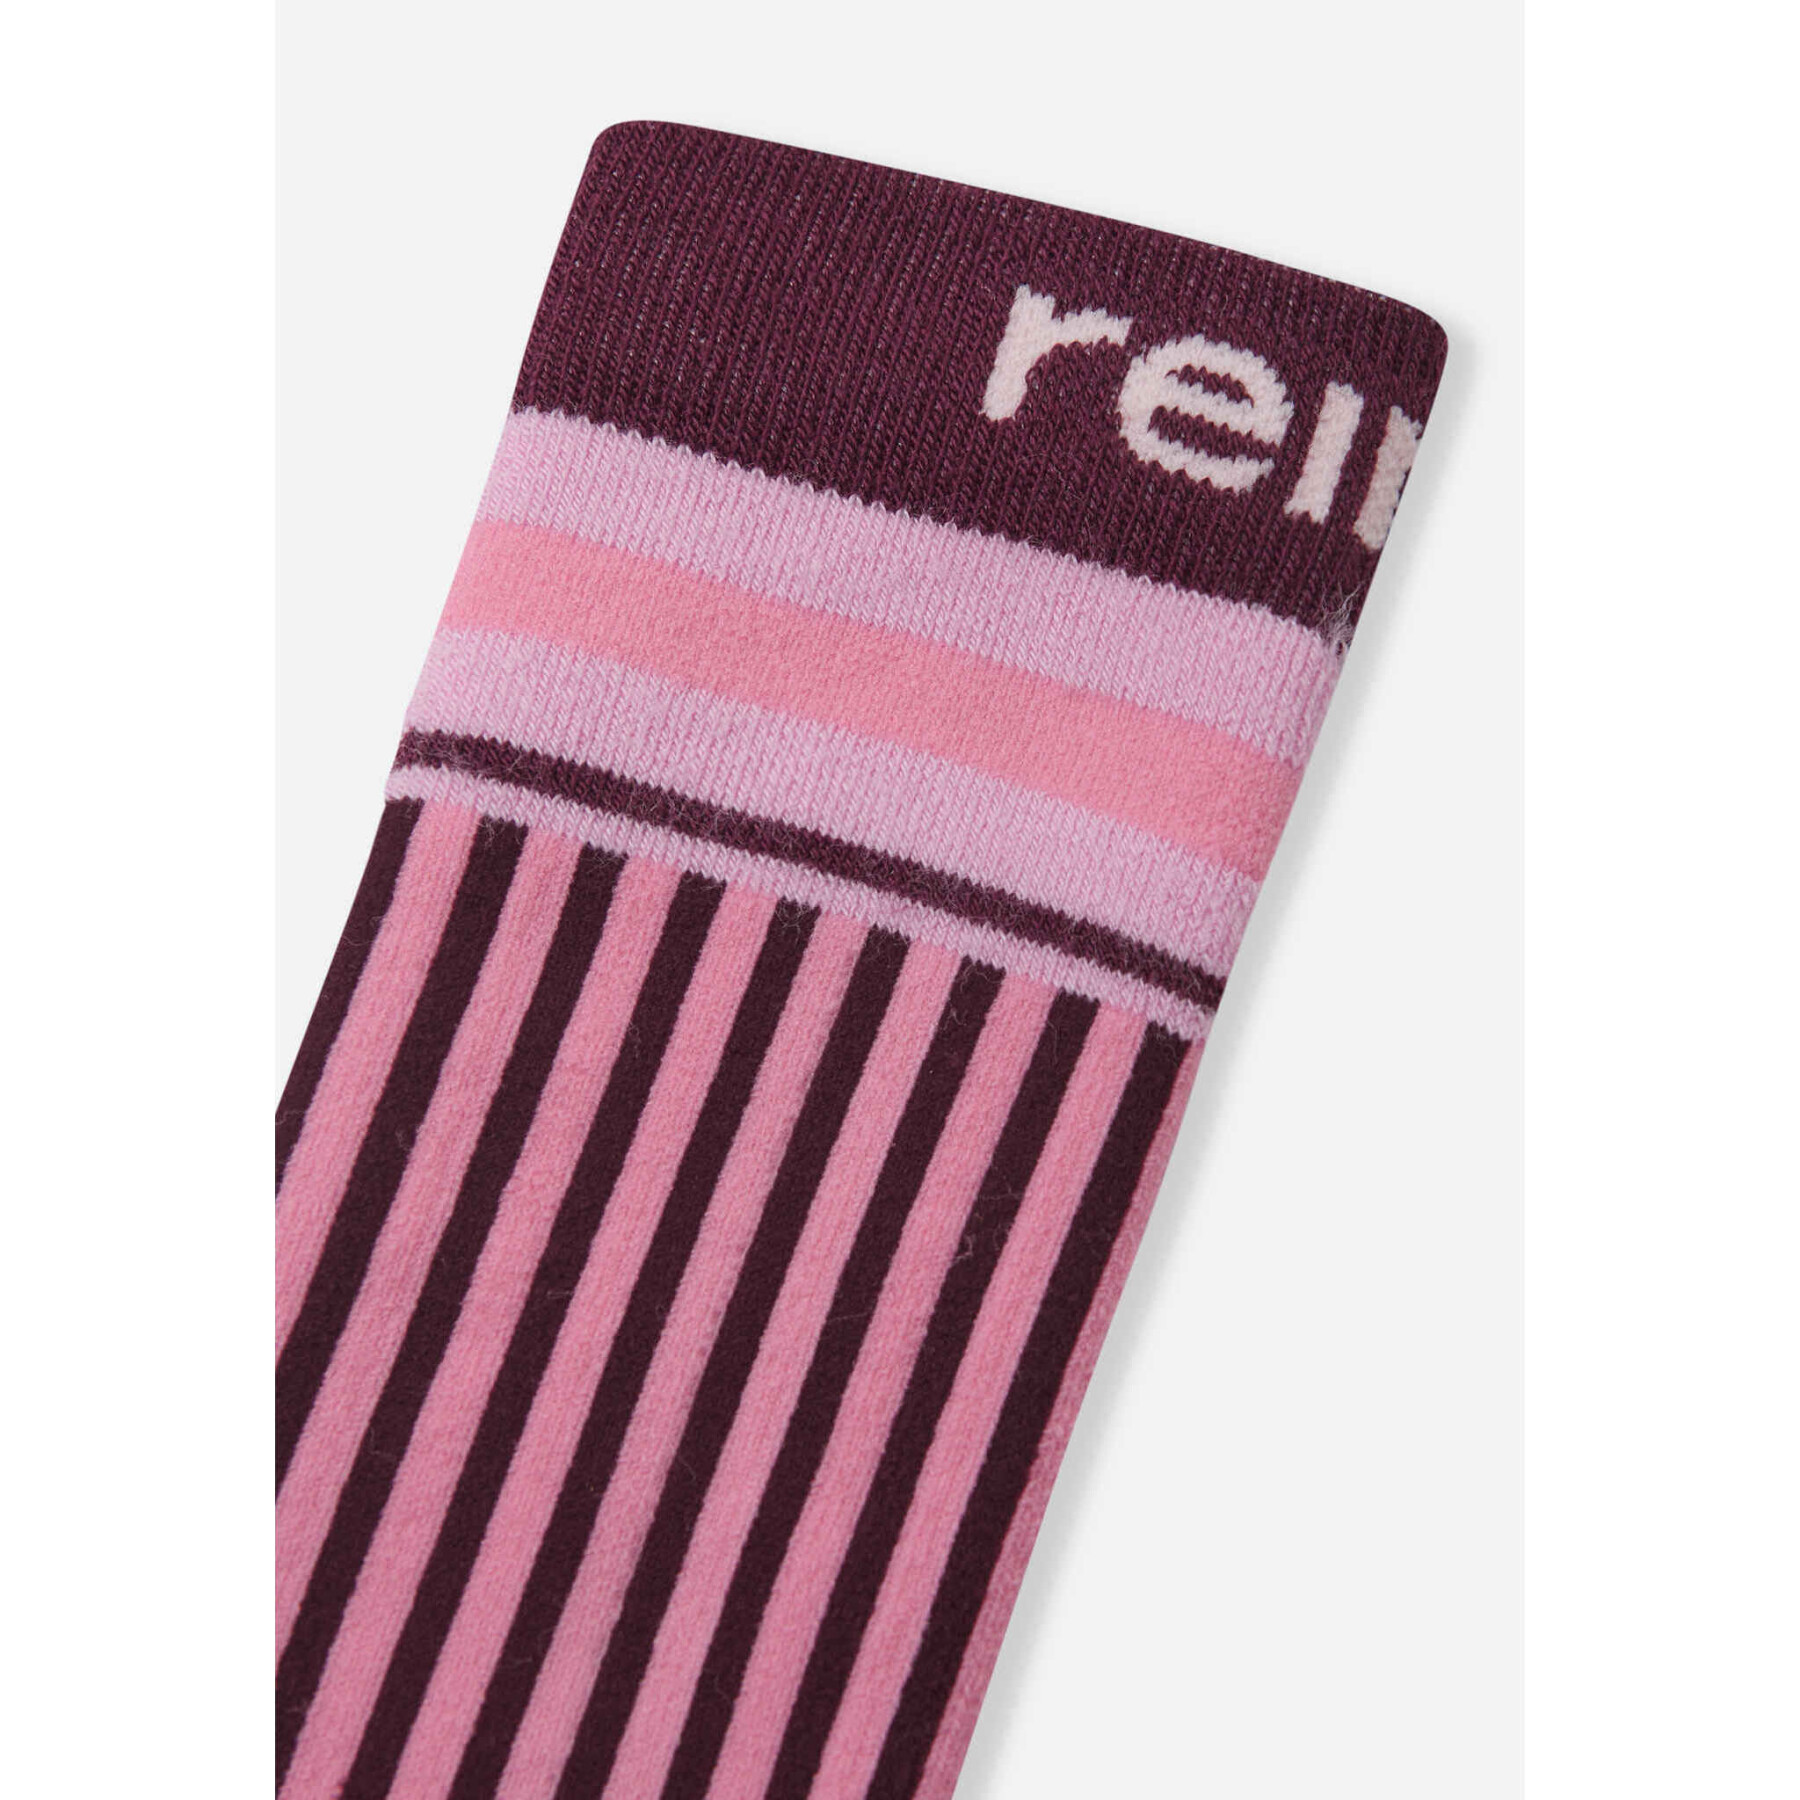 Chaussettes enfant Reima Frotee